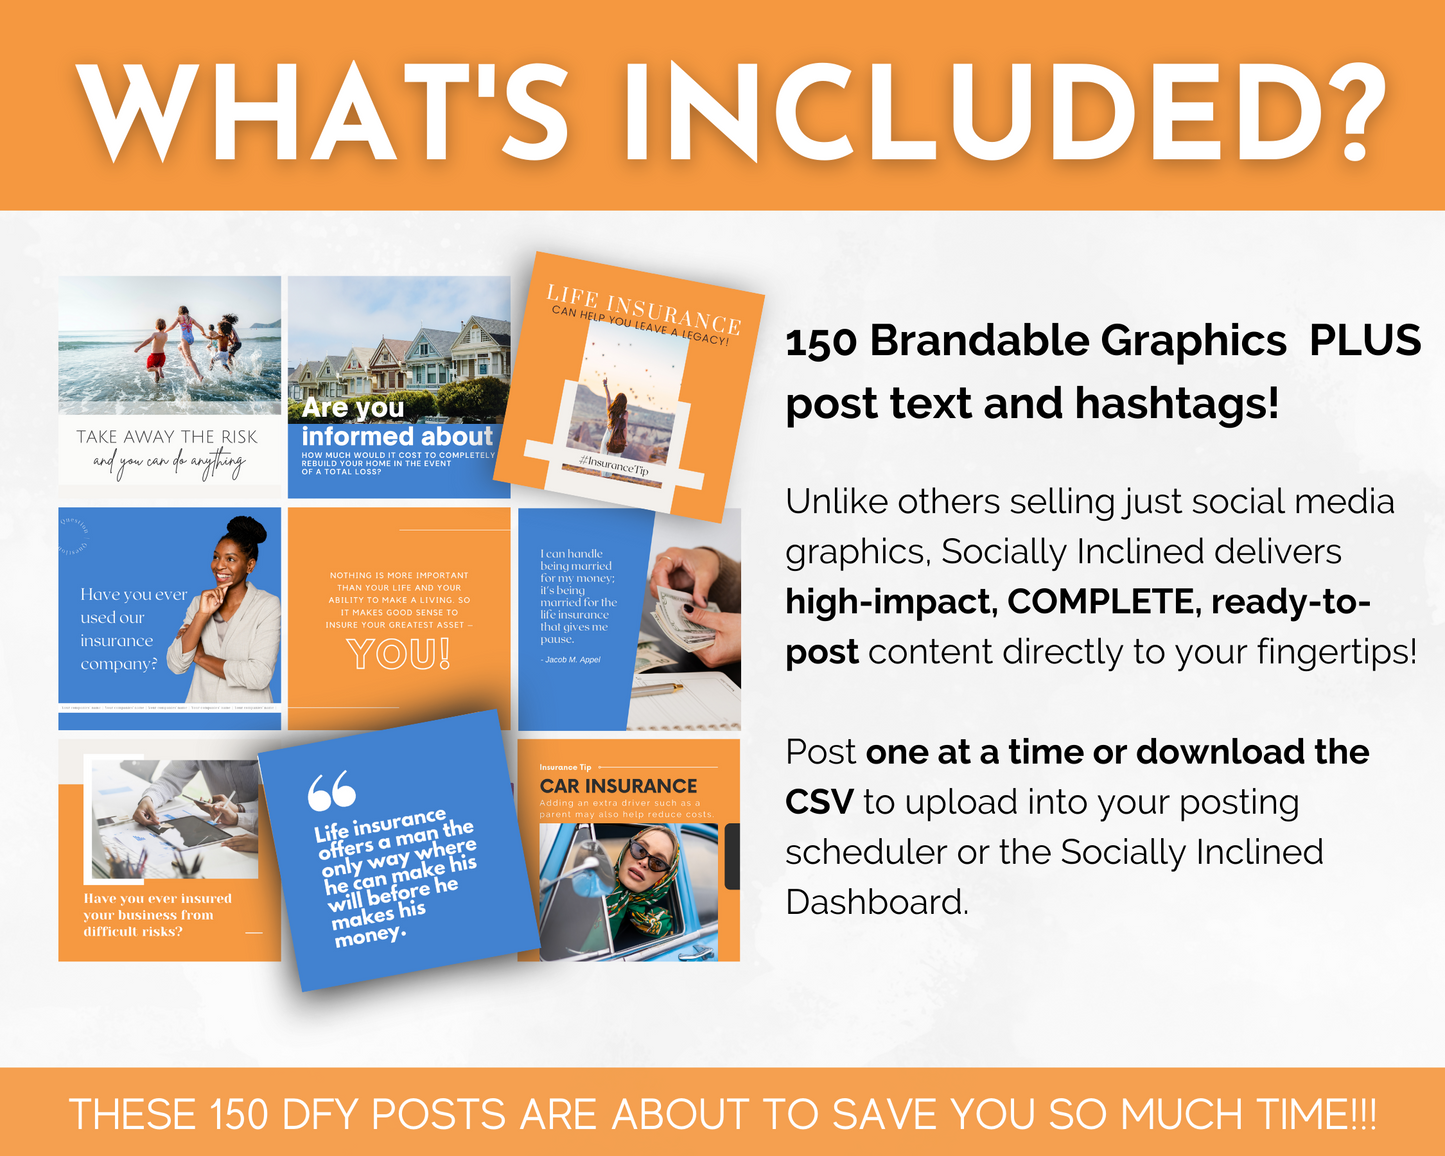 What's included in the Insurance Social Media Post Bundle with Canva Templates from Socially Inclined, with a focus on insurance and content?